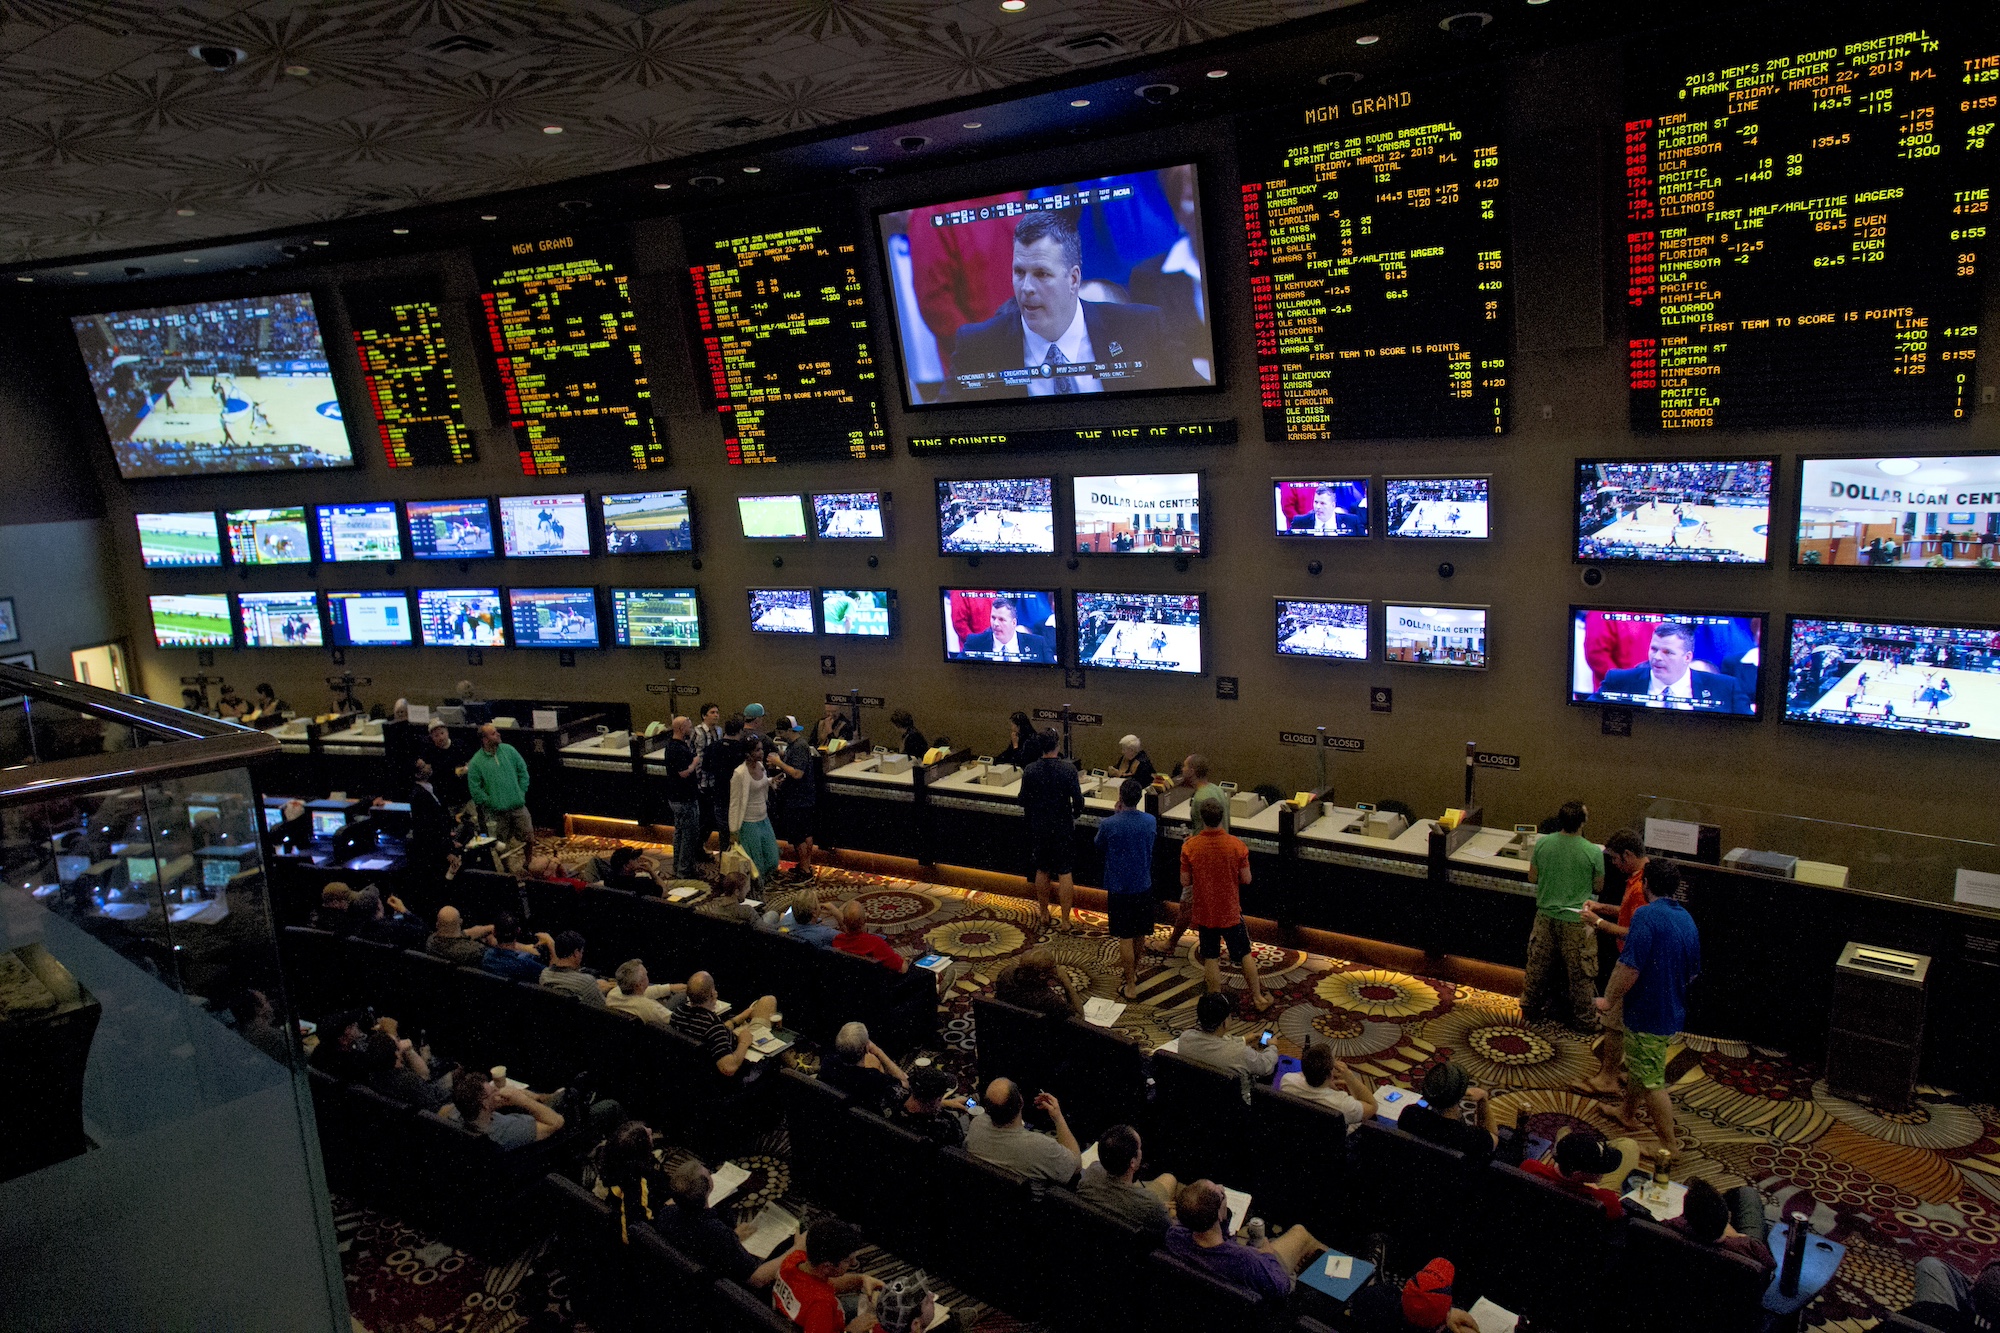 College Basketball: NCAA Playoffs: View of sports book patrons betting on March Madness games at MGM Grand Hotel &amp; Casino. Las Vegas, NV 3/21/2013 CREDIT: Chris Farina (Photo by Chris Farina /Sports Illustrated/Getty Images) (Set Number: X156296 TK2 R1 F31 )